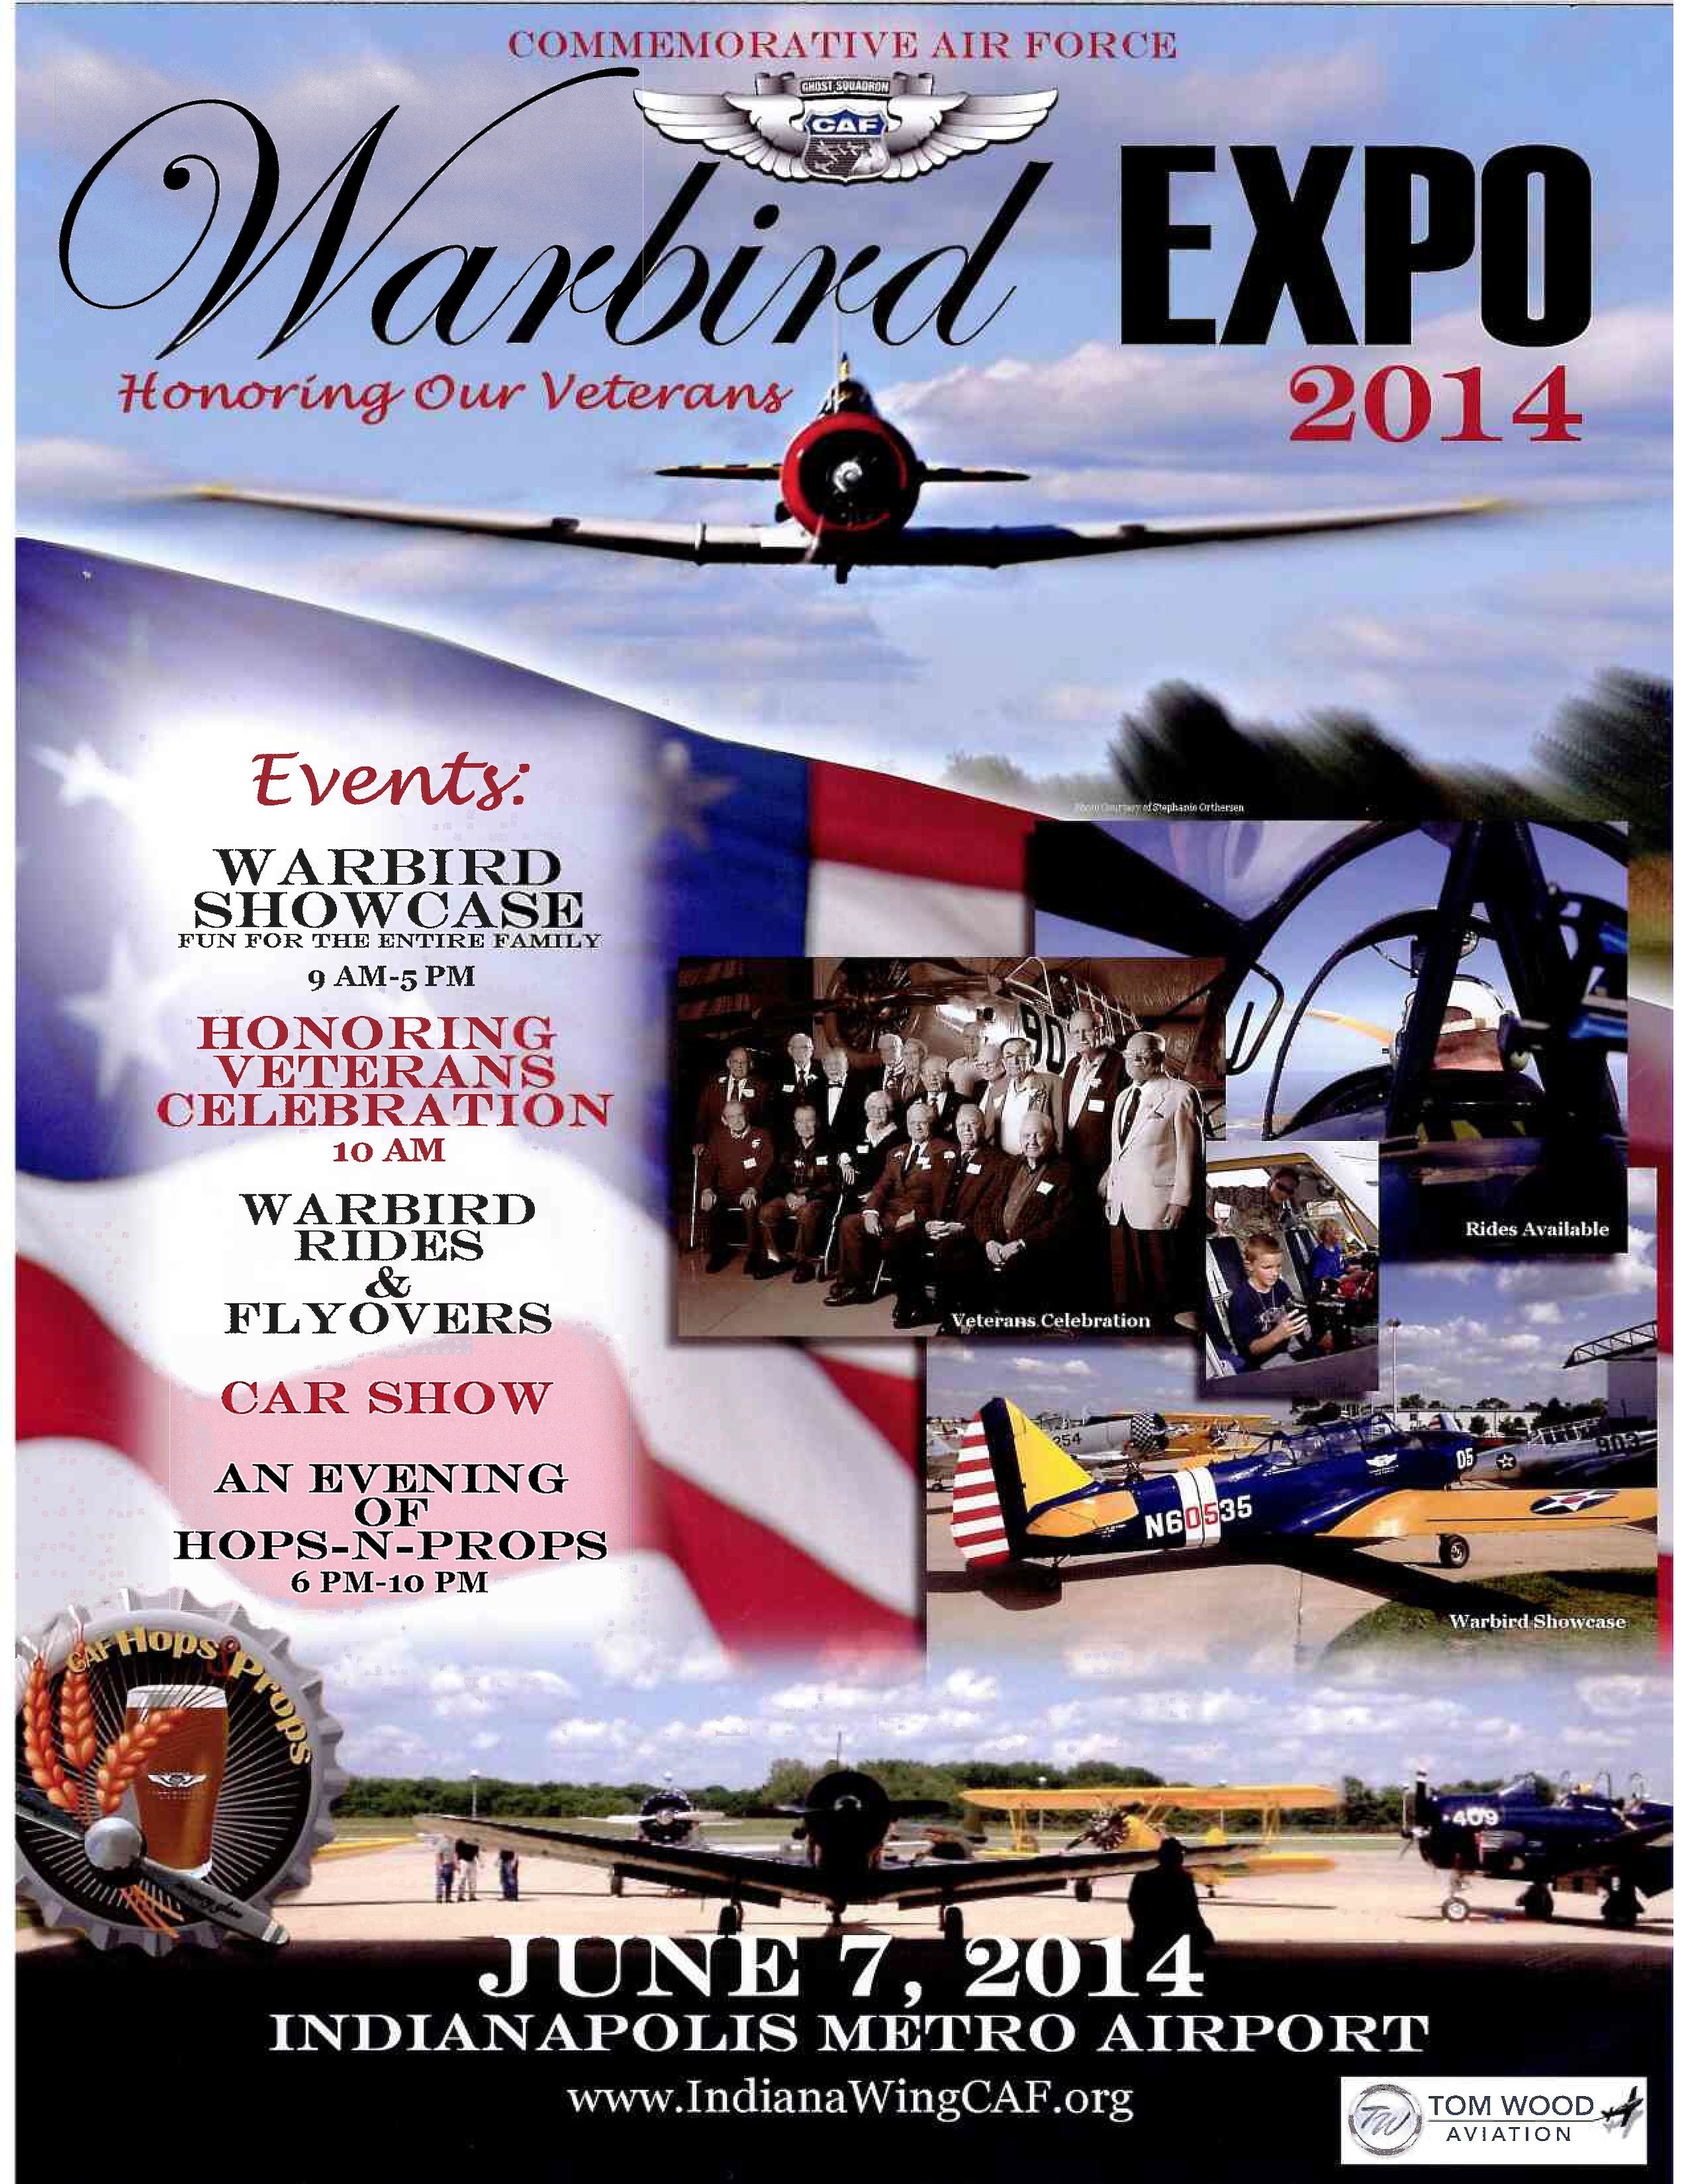 Community Day and War Bird Expo Tom Wood Aviation